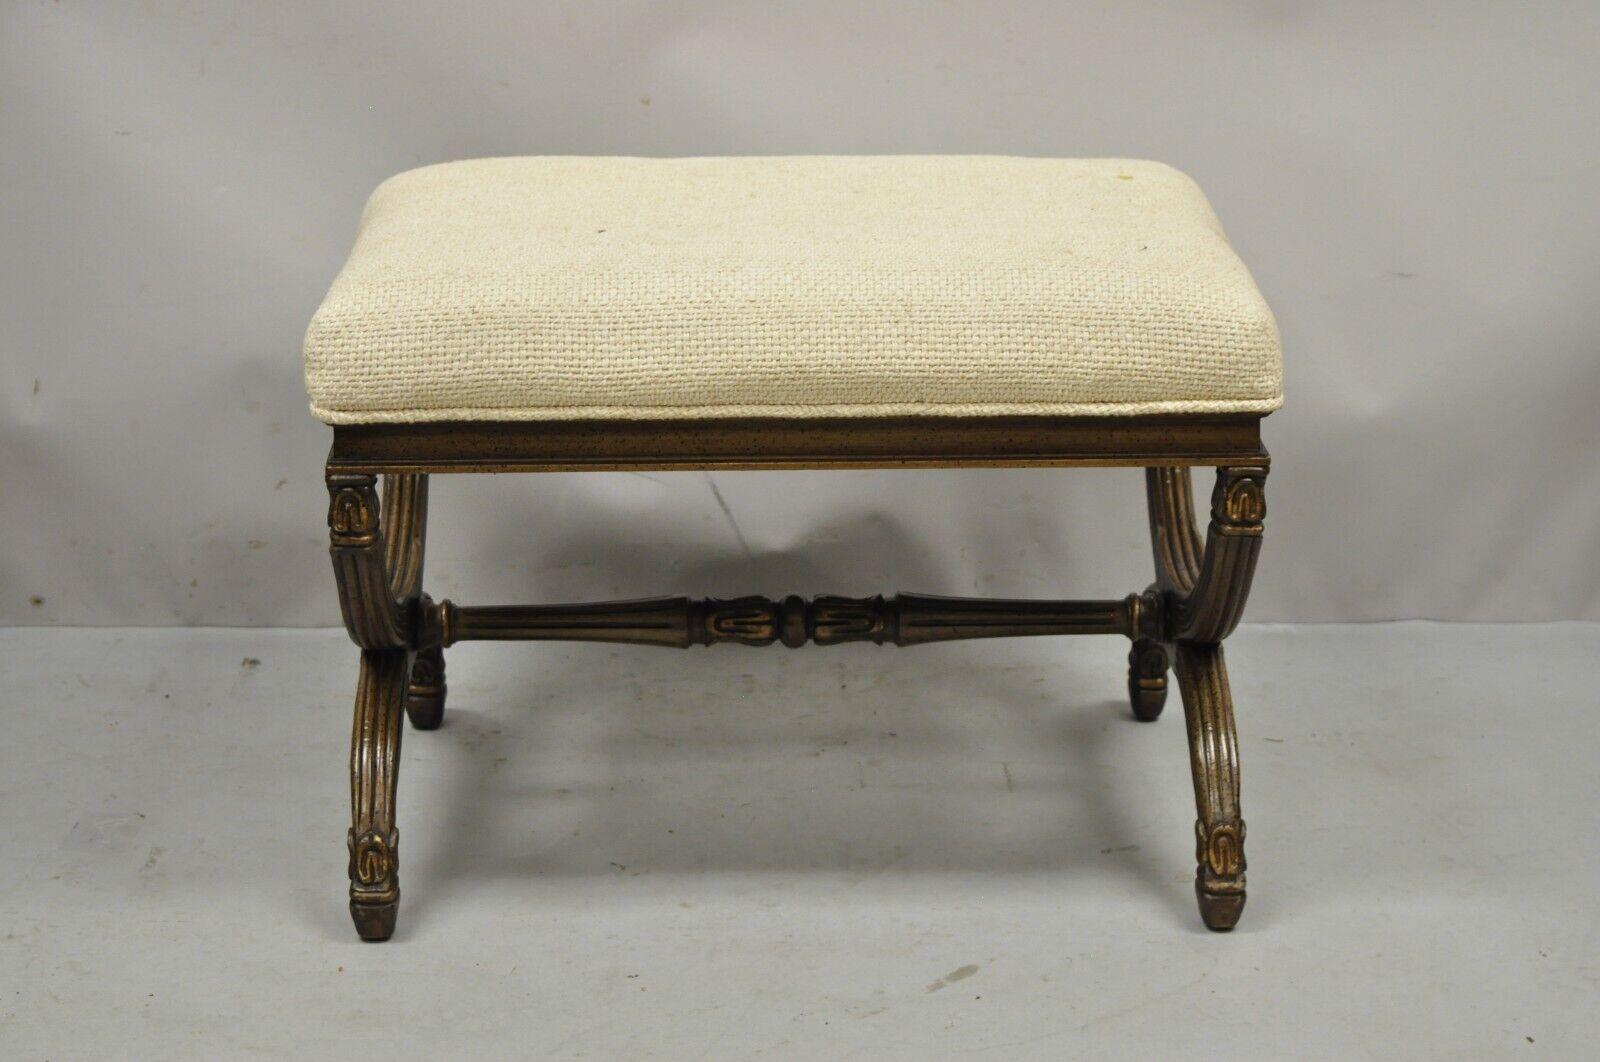 Vintage X-form Italian Neoclassical Style Carved Wood X-frame Bench. Item features carved X-form base, solid wood frame, distressed finish, great style and form. Circa mid 20th century. Measurements: 17